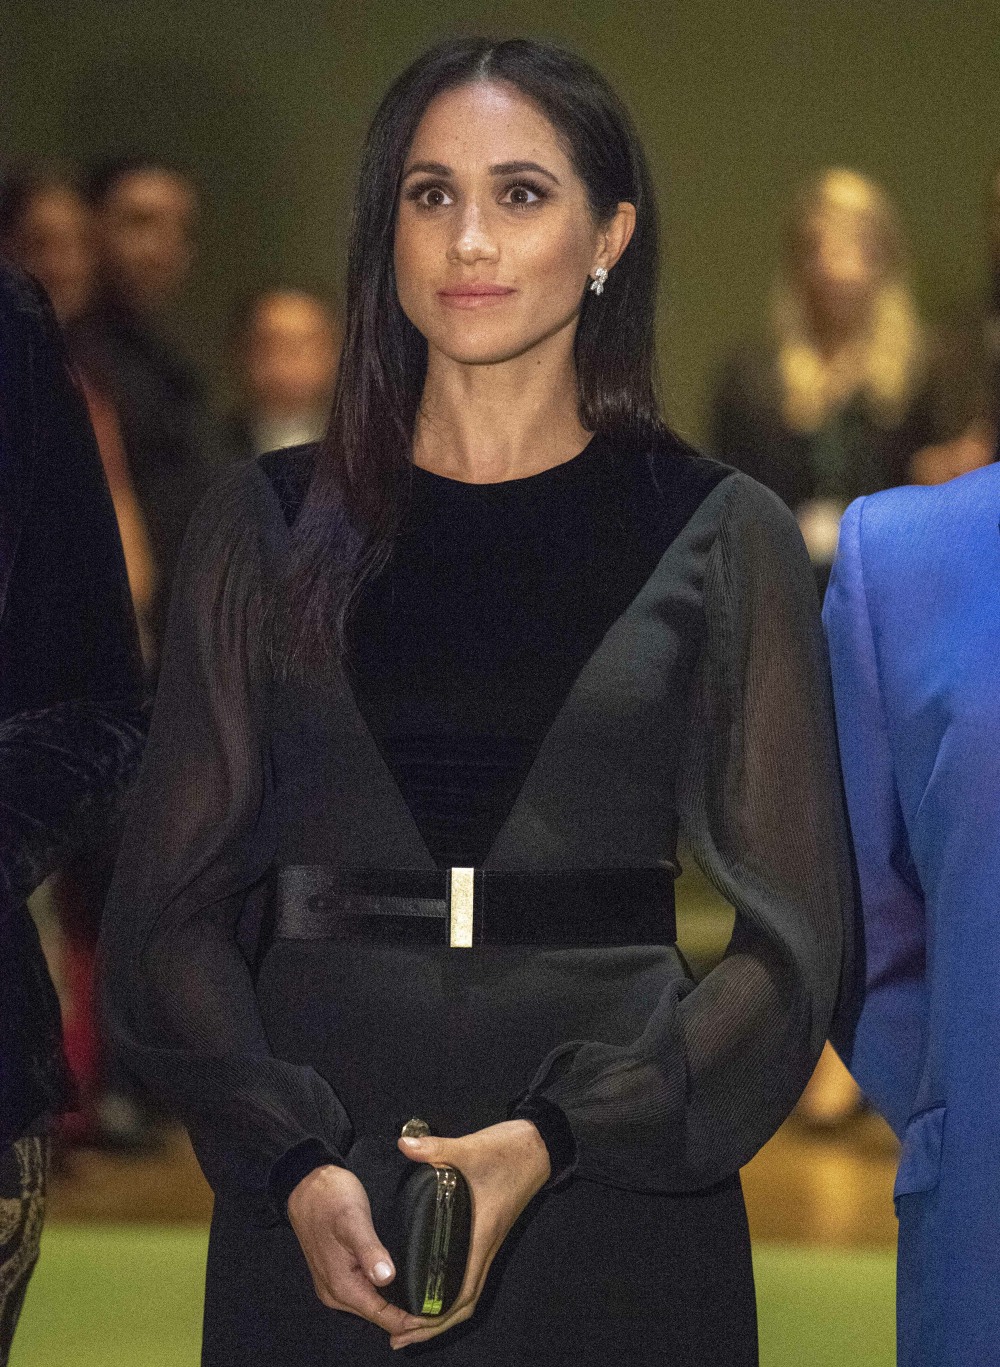 The Duchess of Sussex attended the opening of 'Oceania' at the Royal Academy of Arts